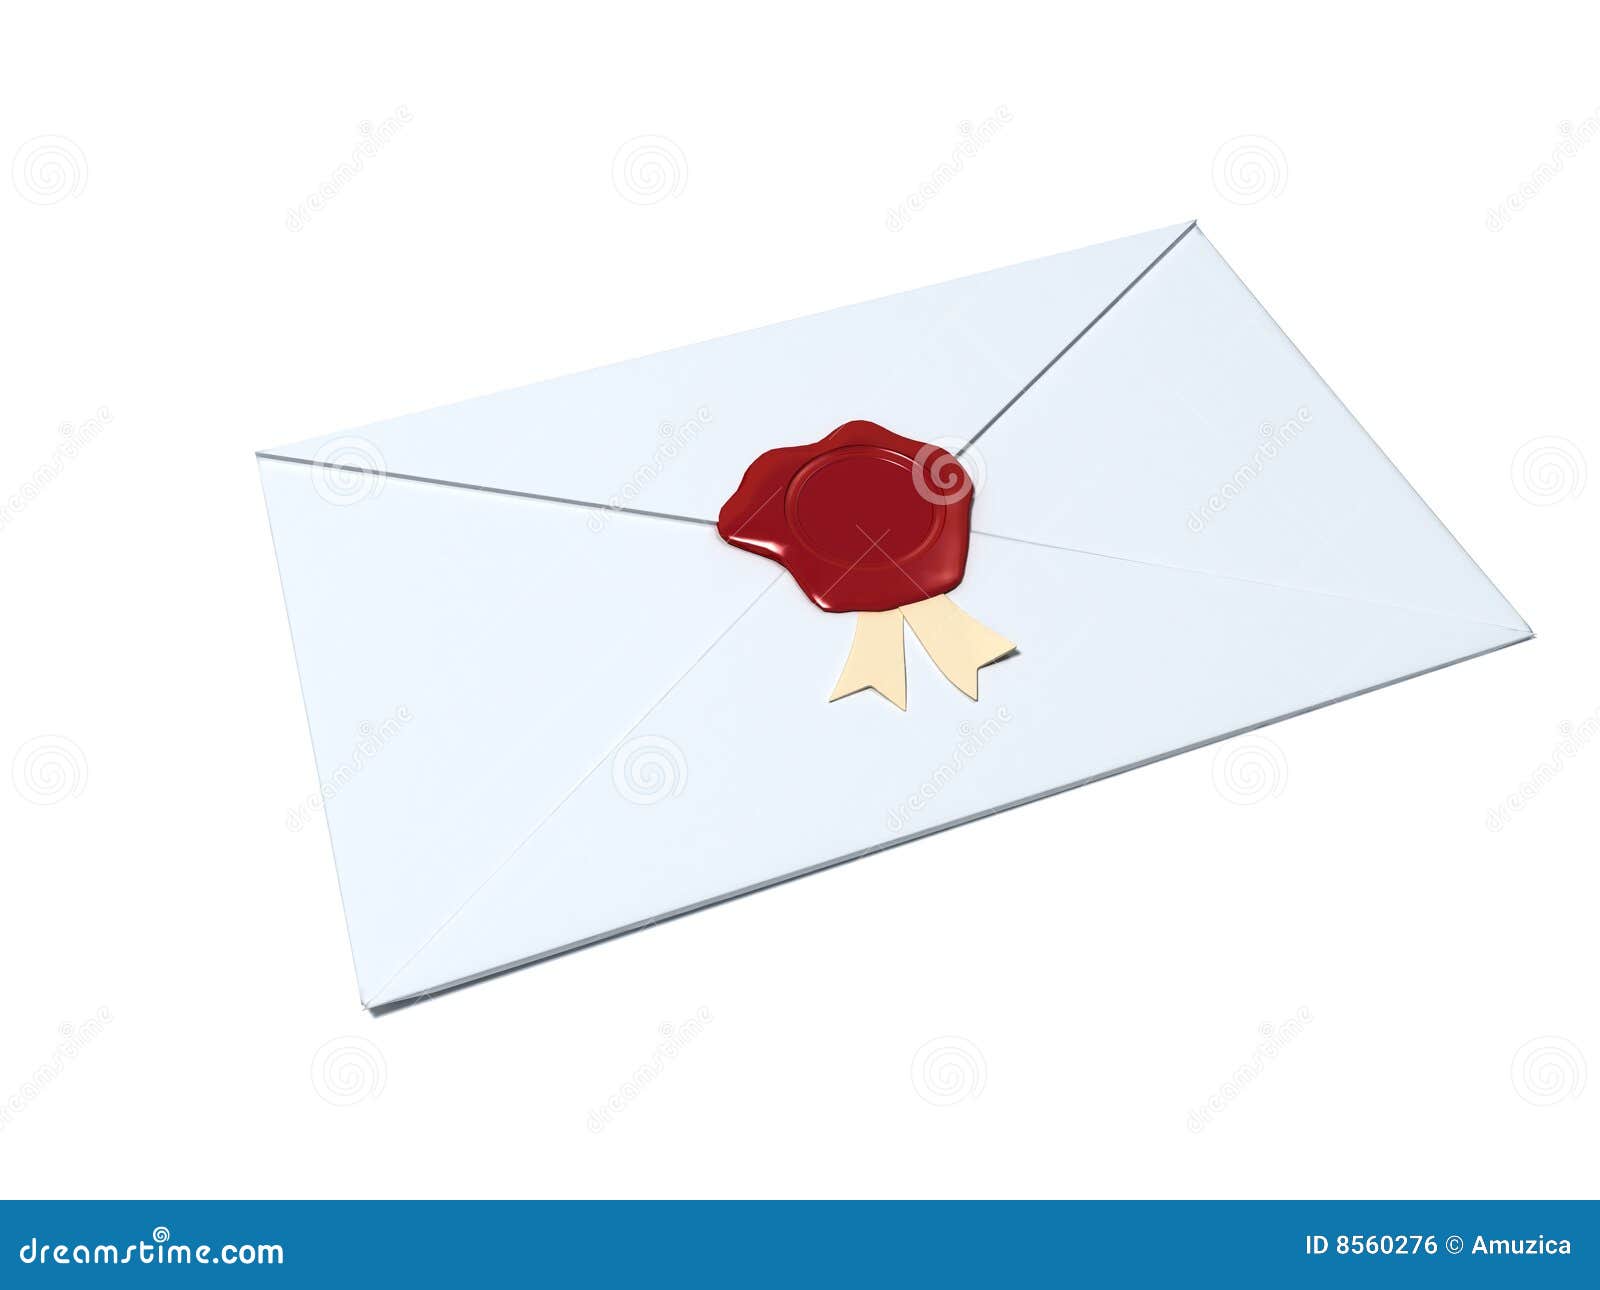 white envelope sealed with red wax